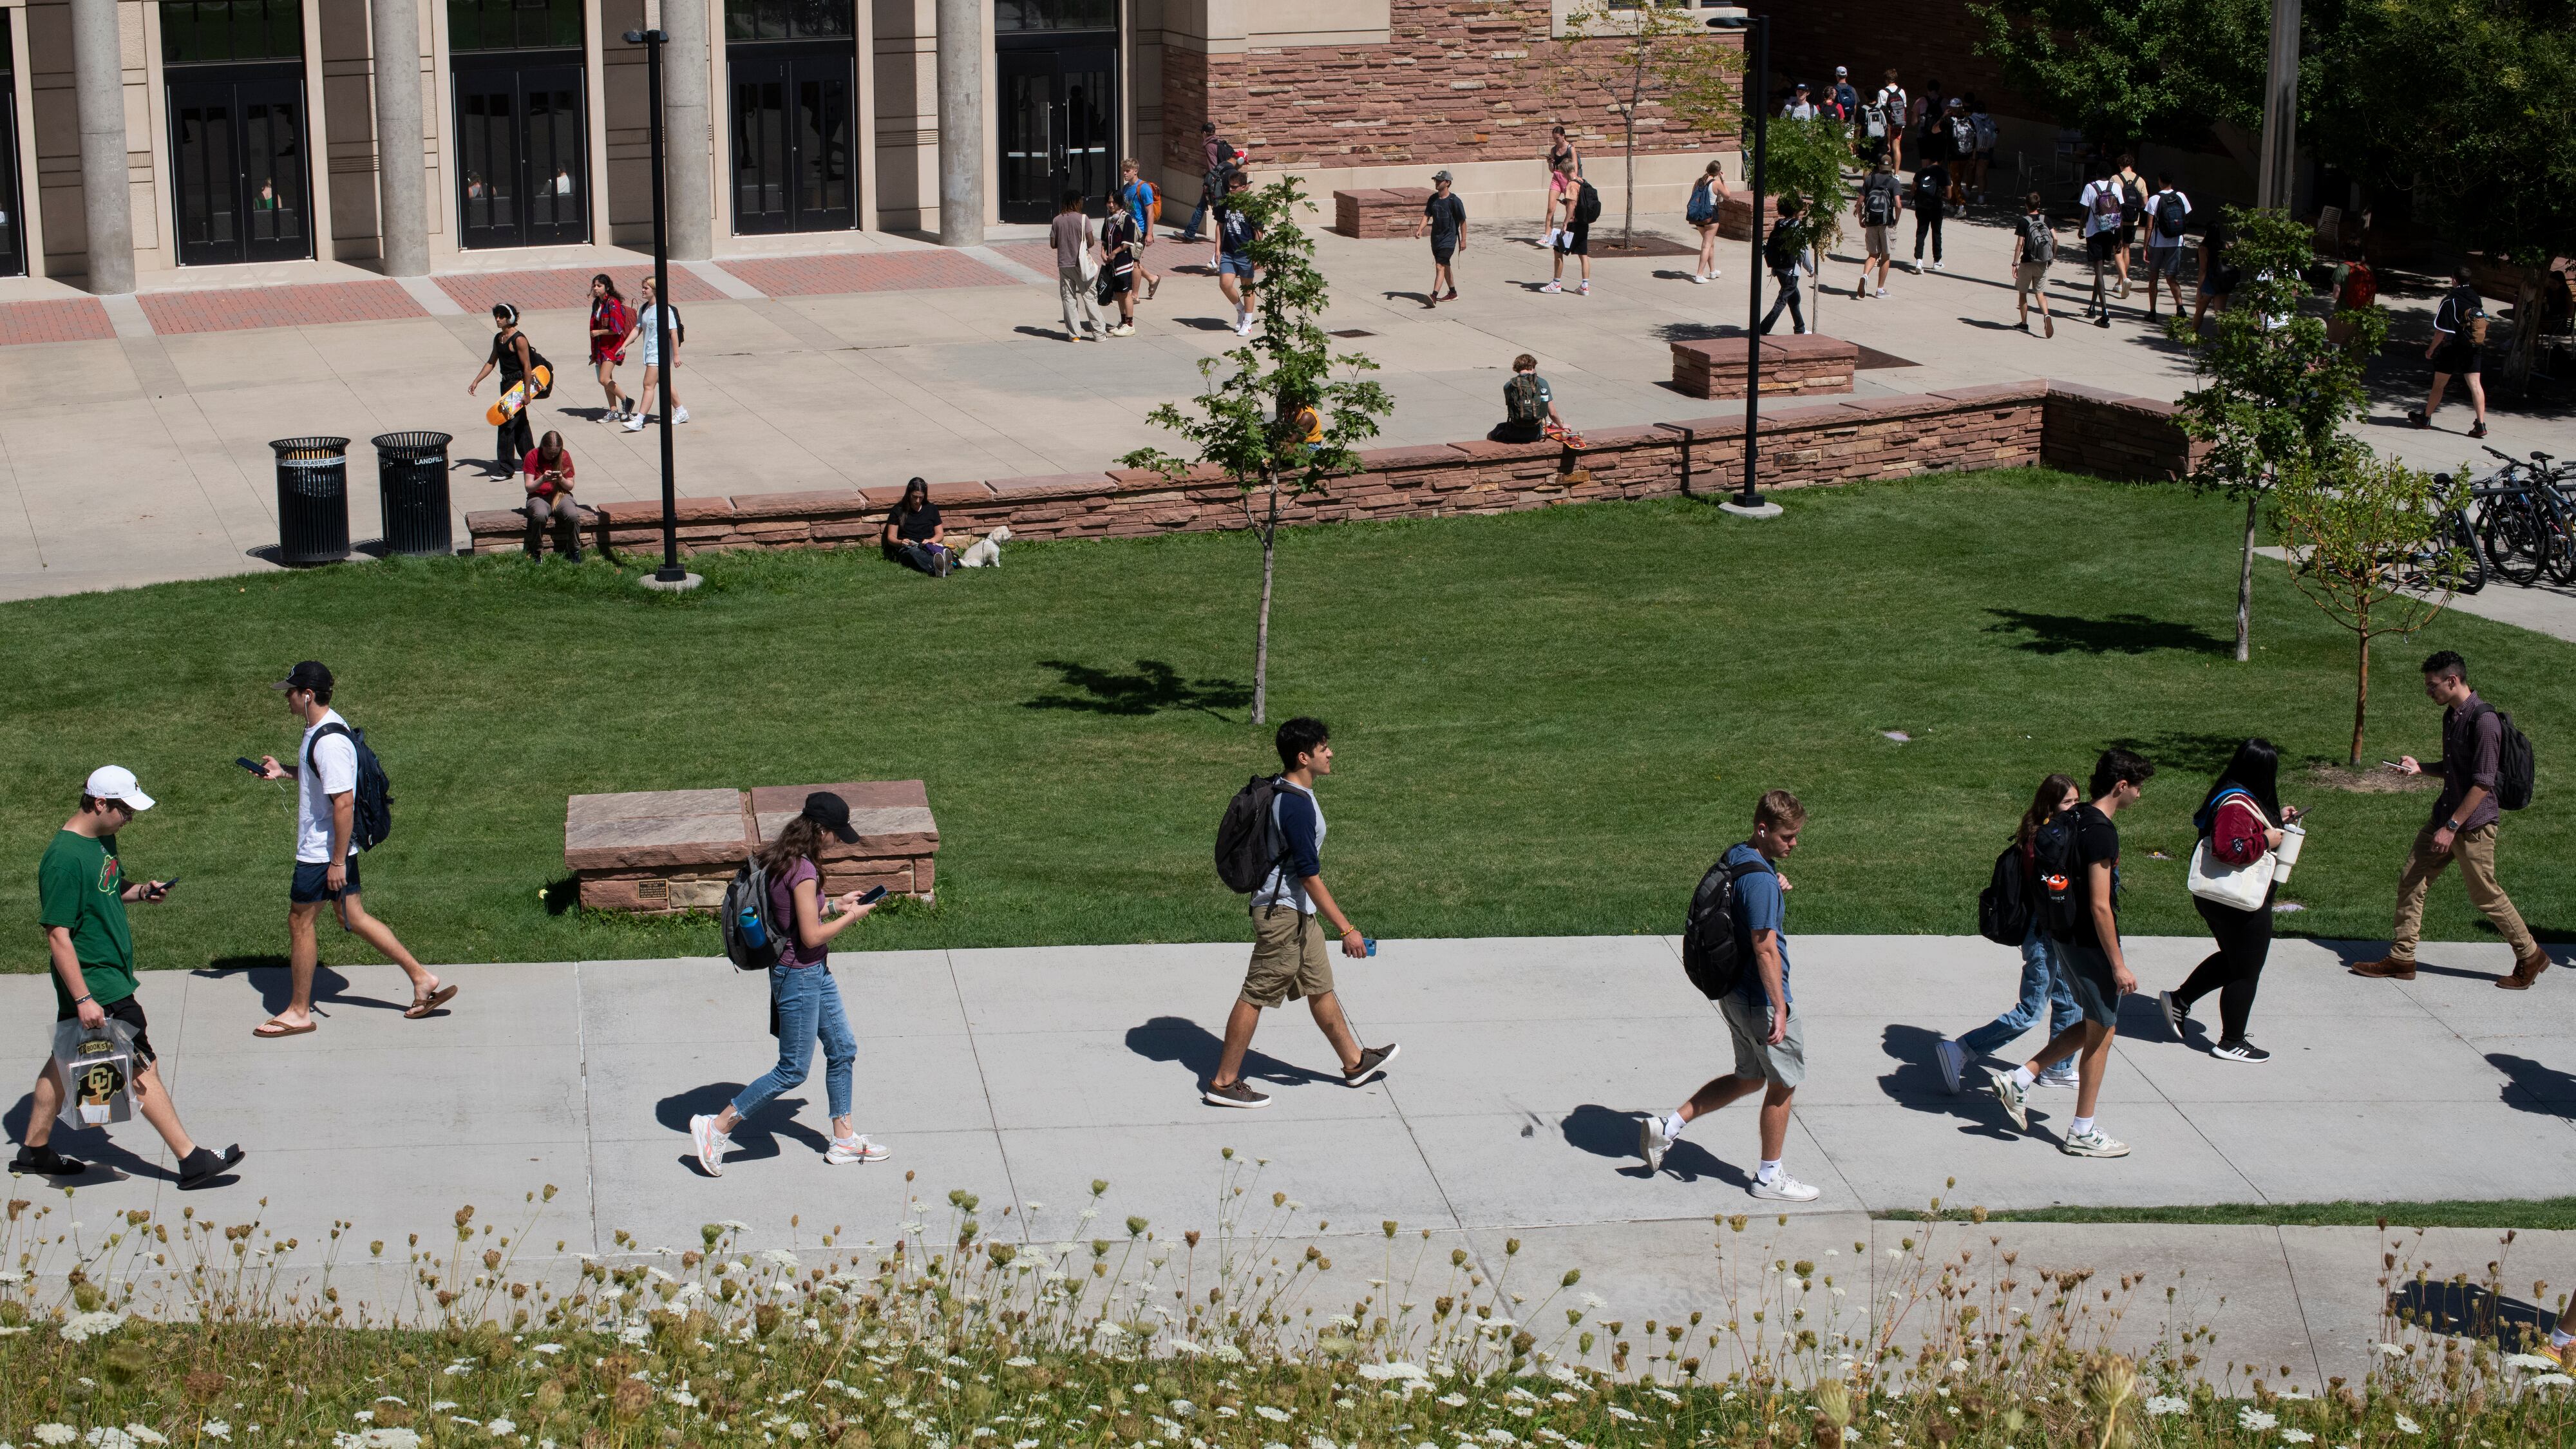 Students walk on a sidewalk path with brick buildings in the background.